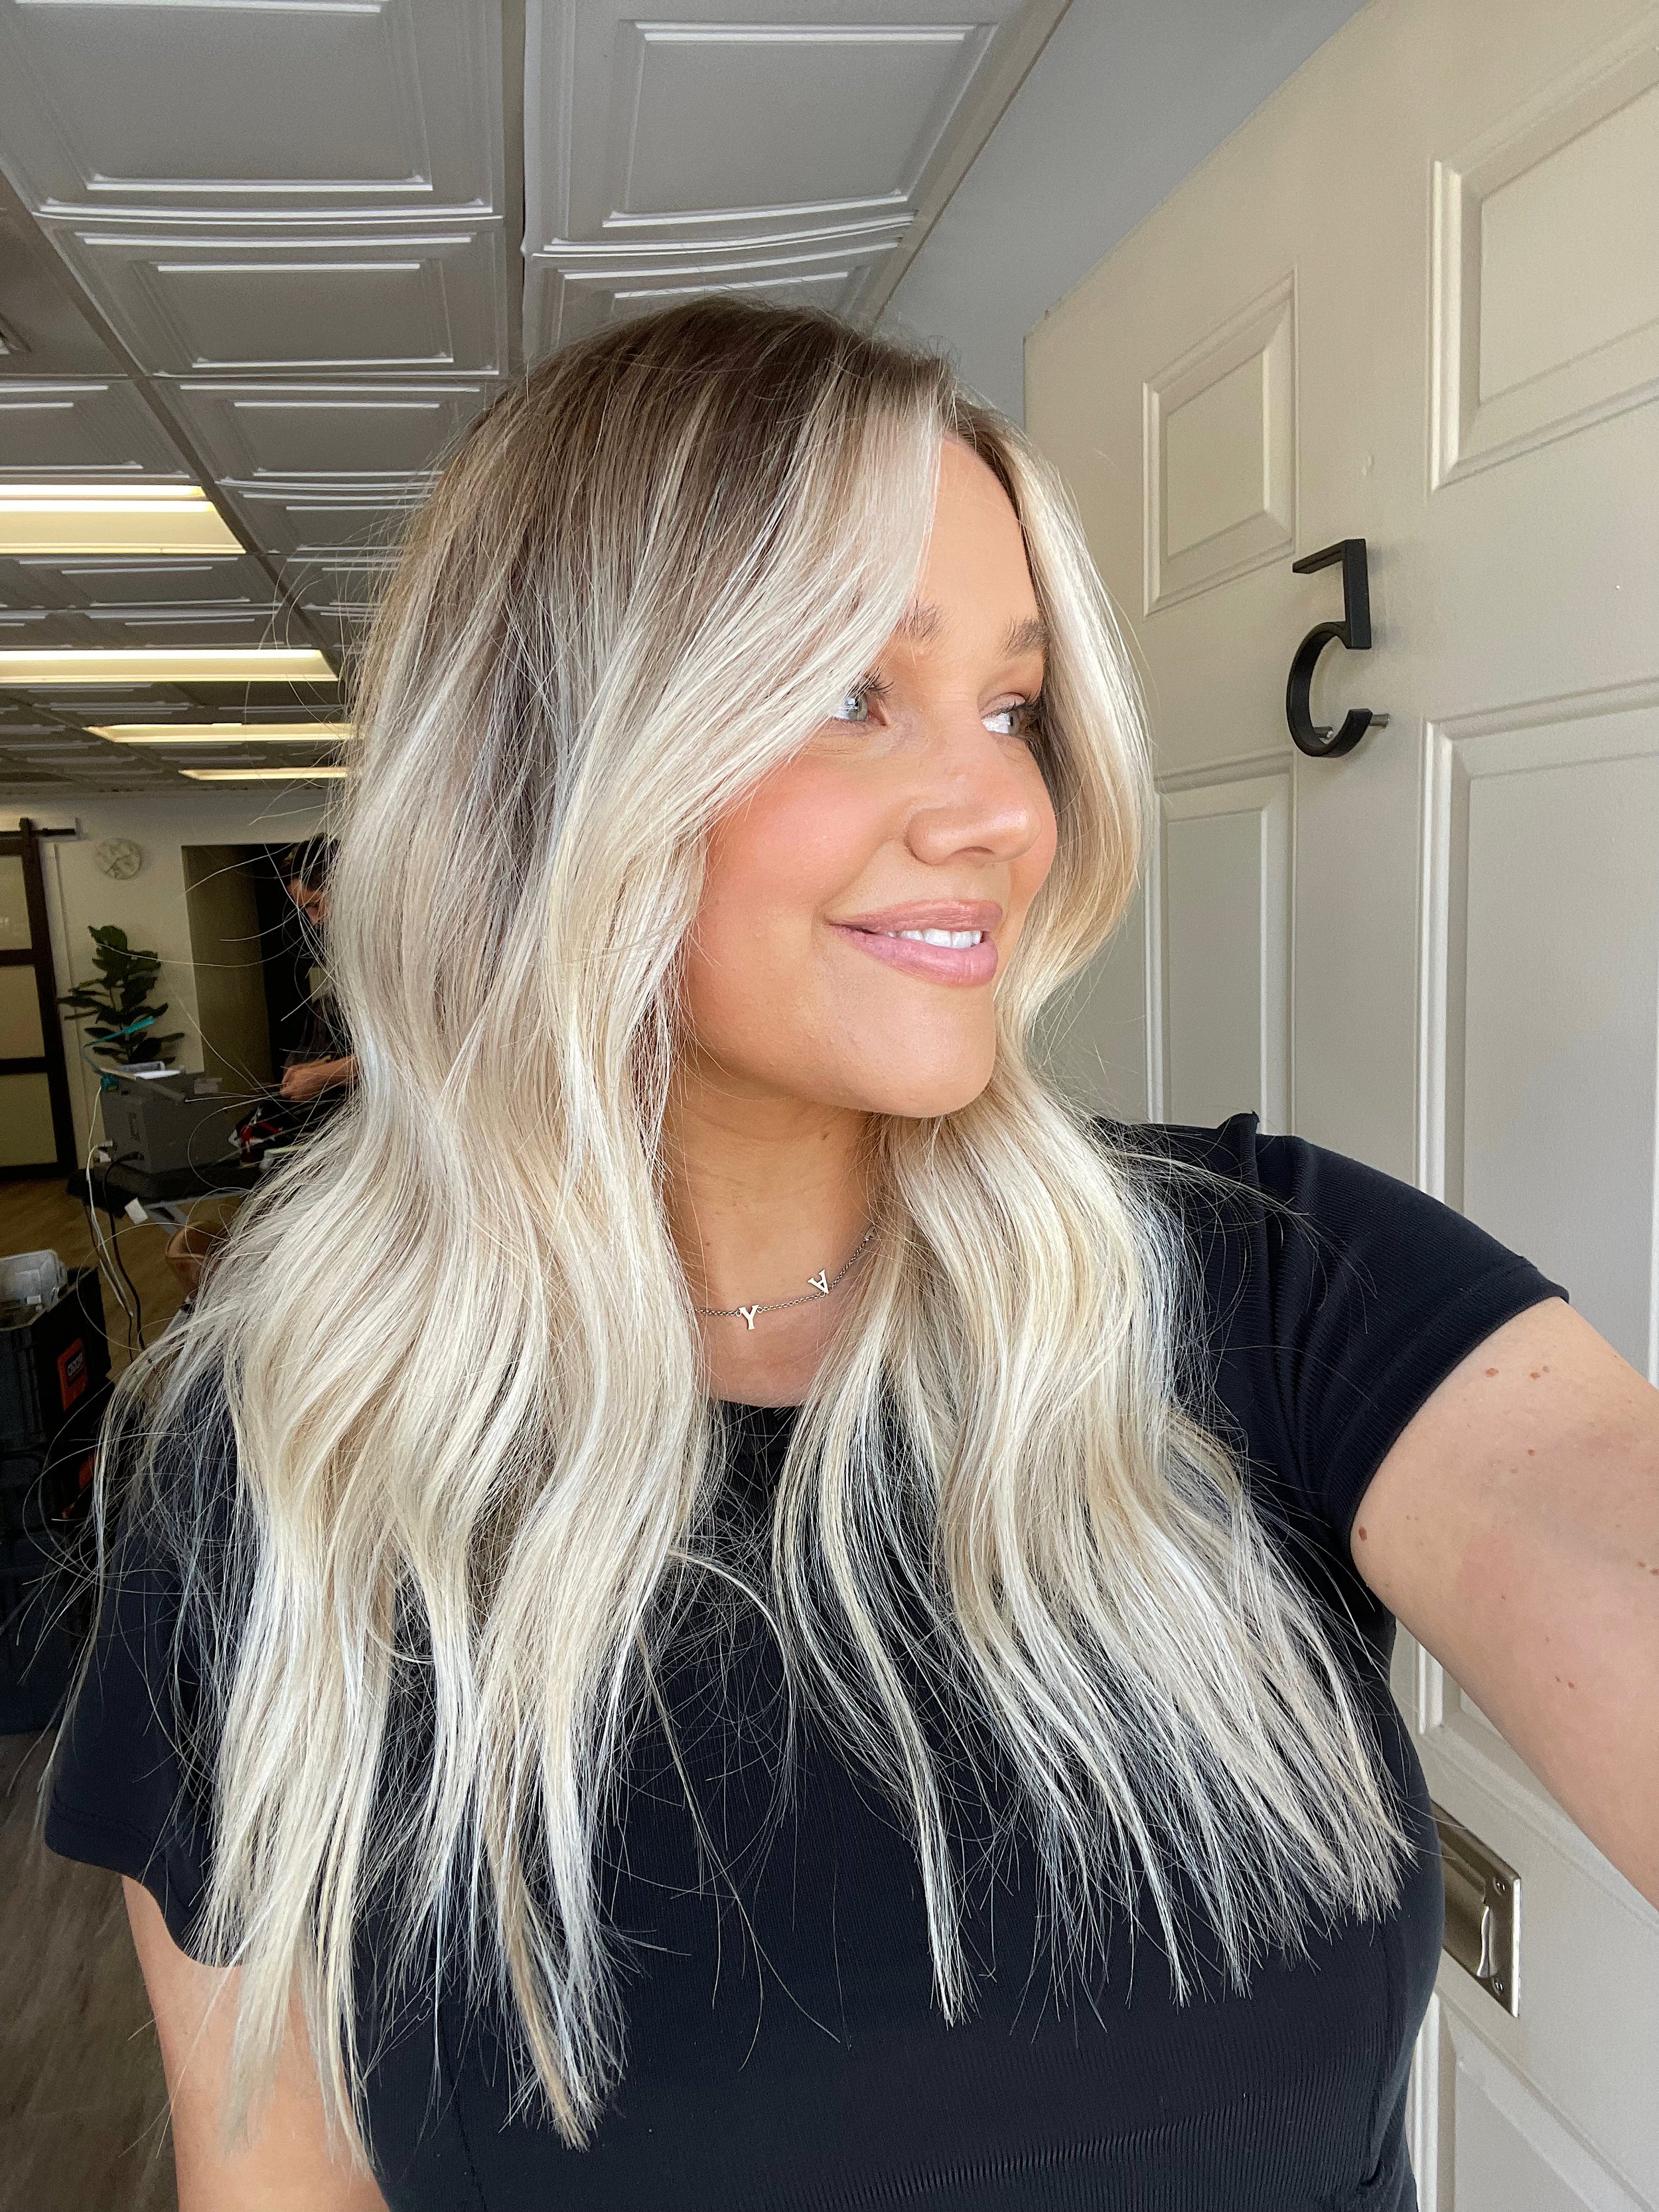 Bre Sheppard New Hair For Fall - Bright Blondie Rooted Brown Natural Look .JPG